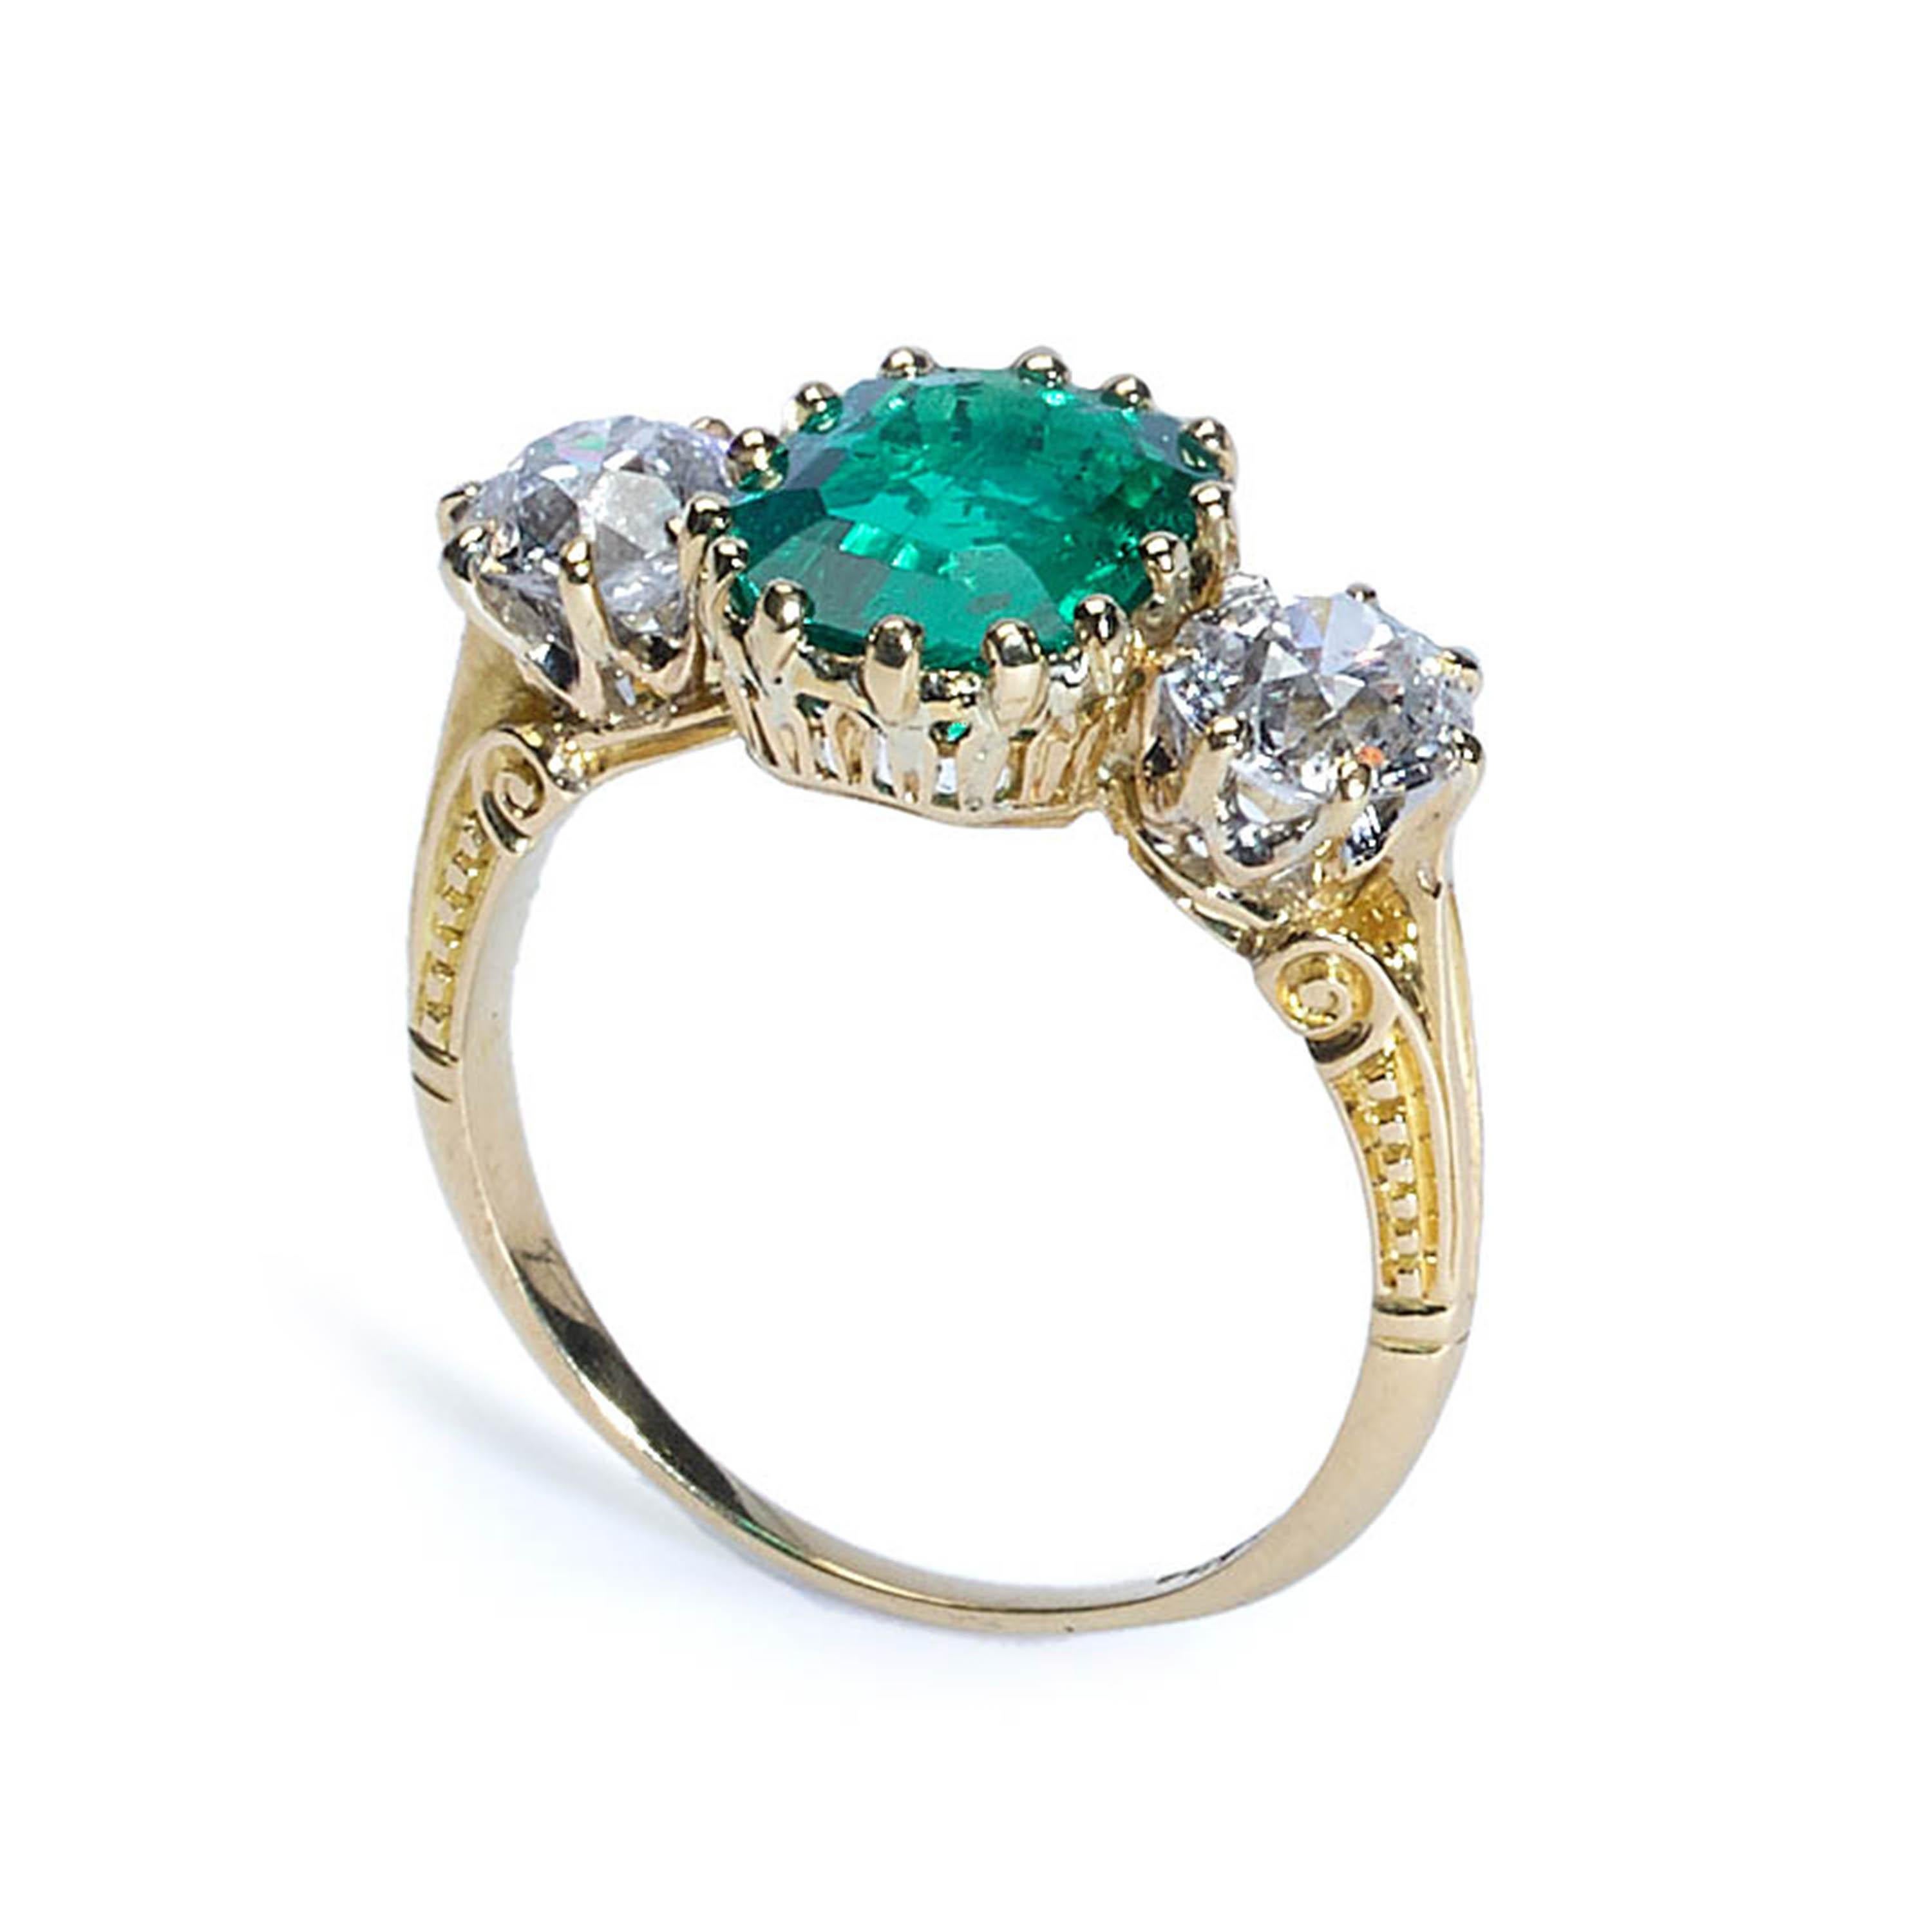 An antique emerald and diamond three stone ring, set with a Columbian emerald-cut emerald, weighing 2.66ct, in a decorative, fourteen claw setting, with two old-cut diamonds either side, weighing approximately 0.65ct, in eight claw crown settings,